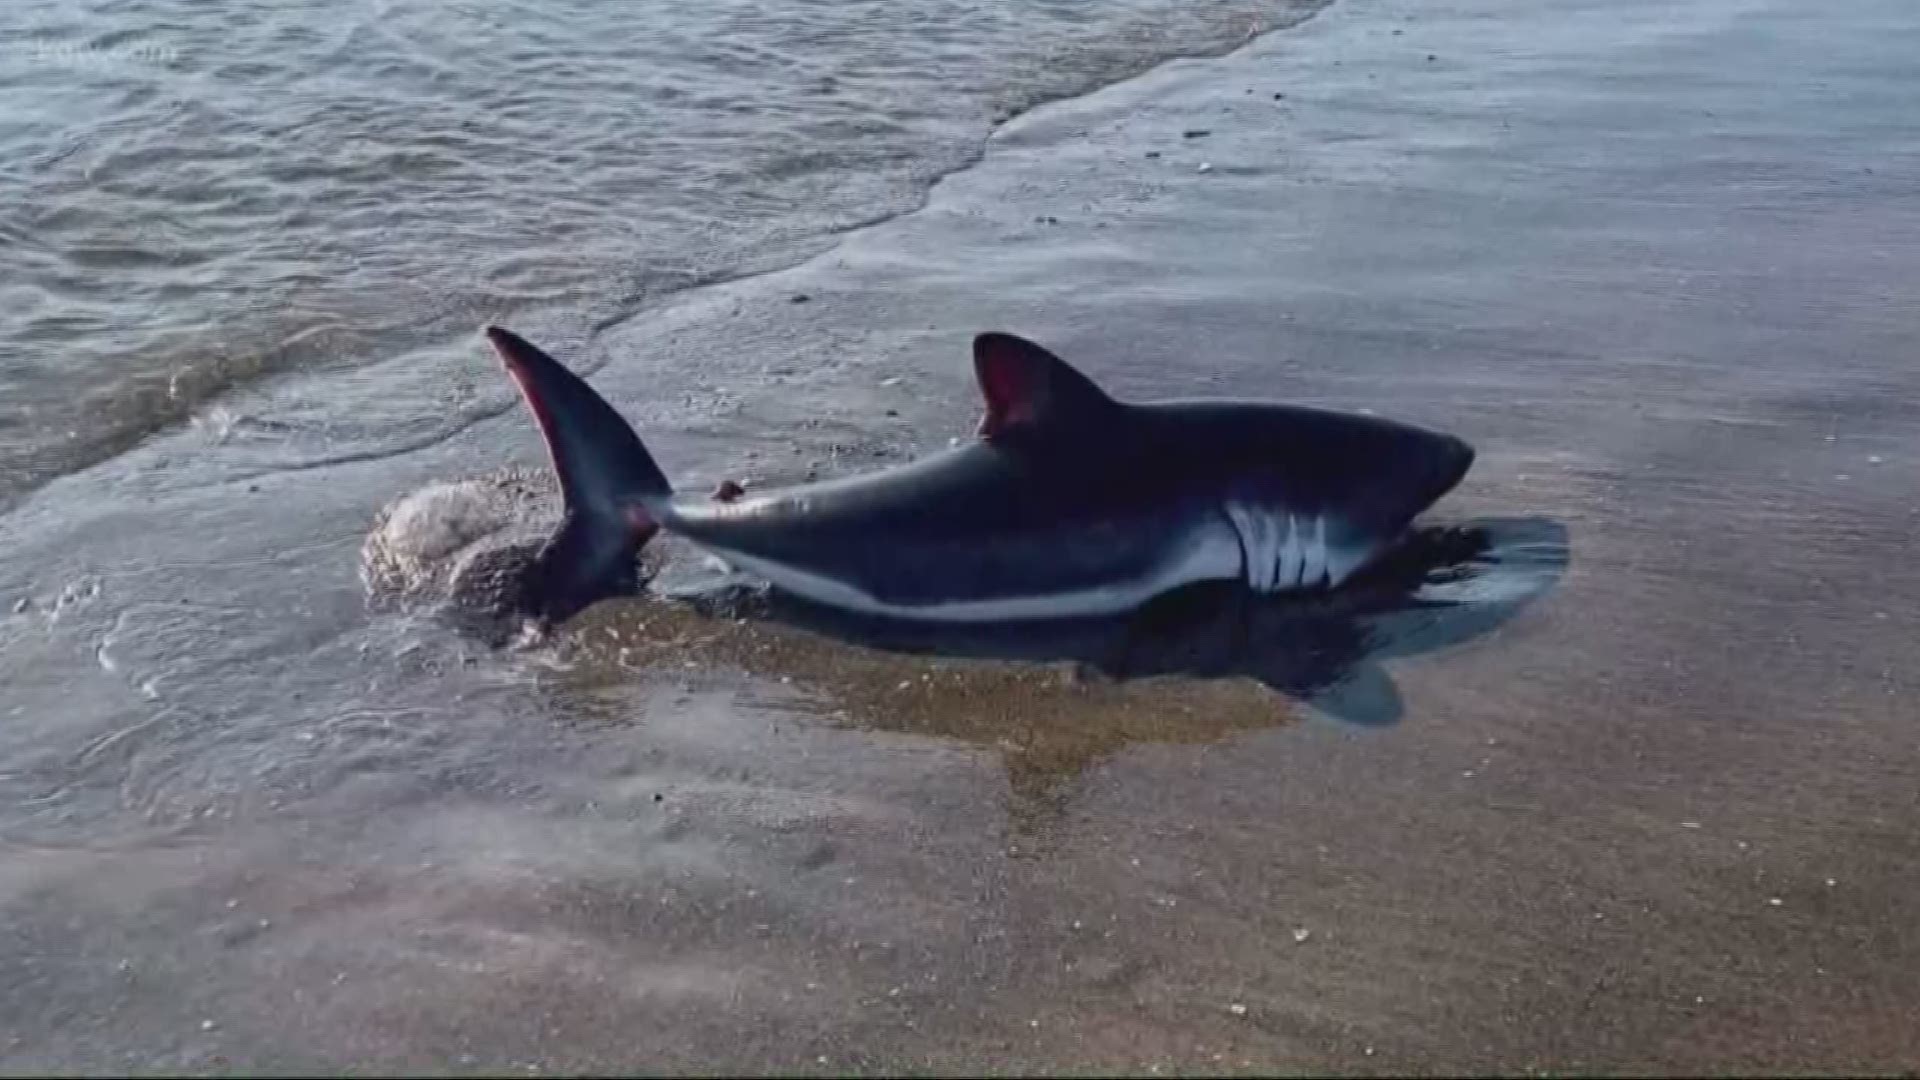 A shark found beached on the Oregon Coast was a juvenile salmon shark. Experts say they are common and don’t attack humans.